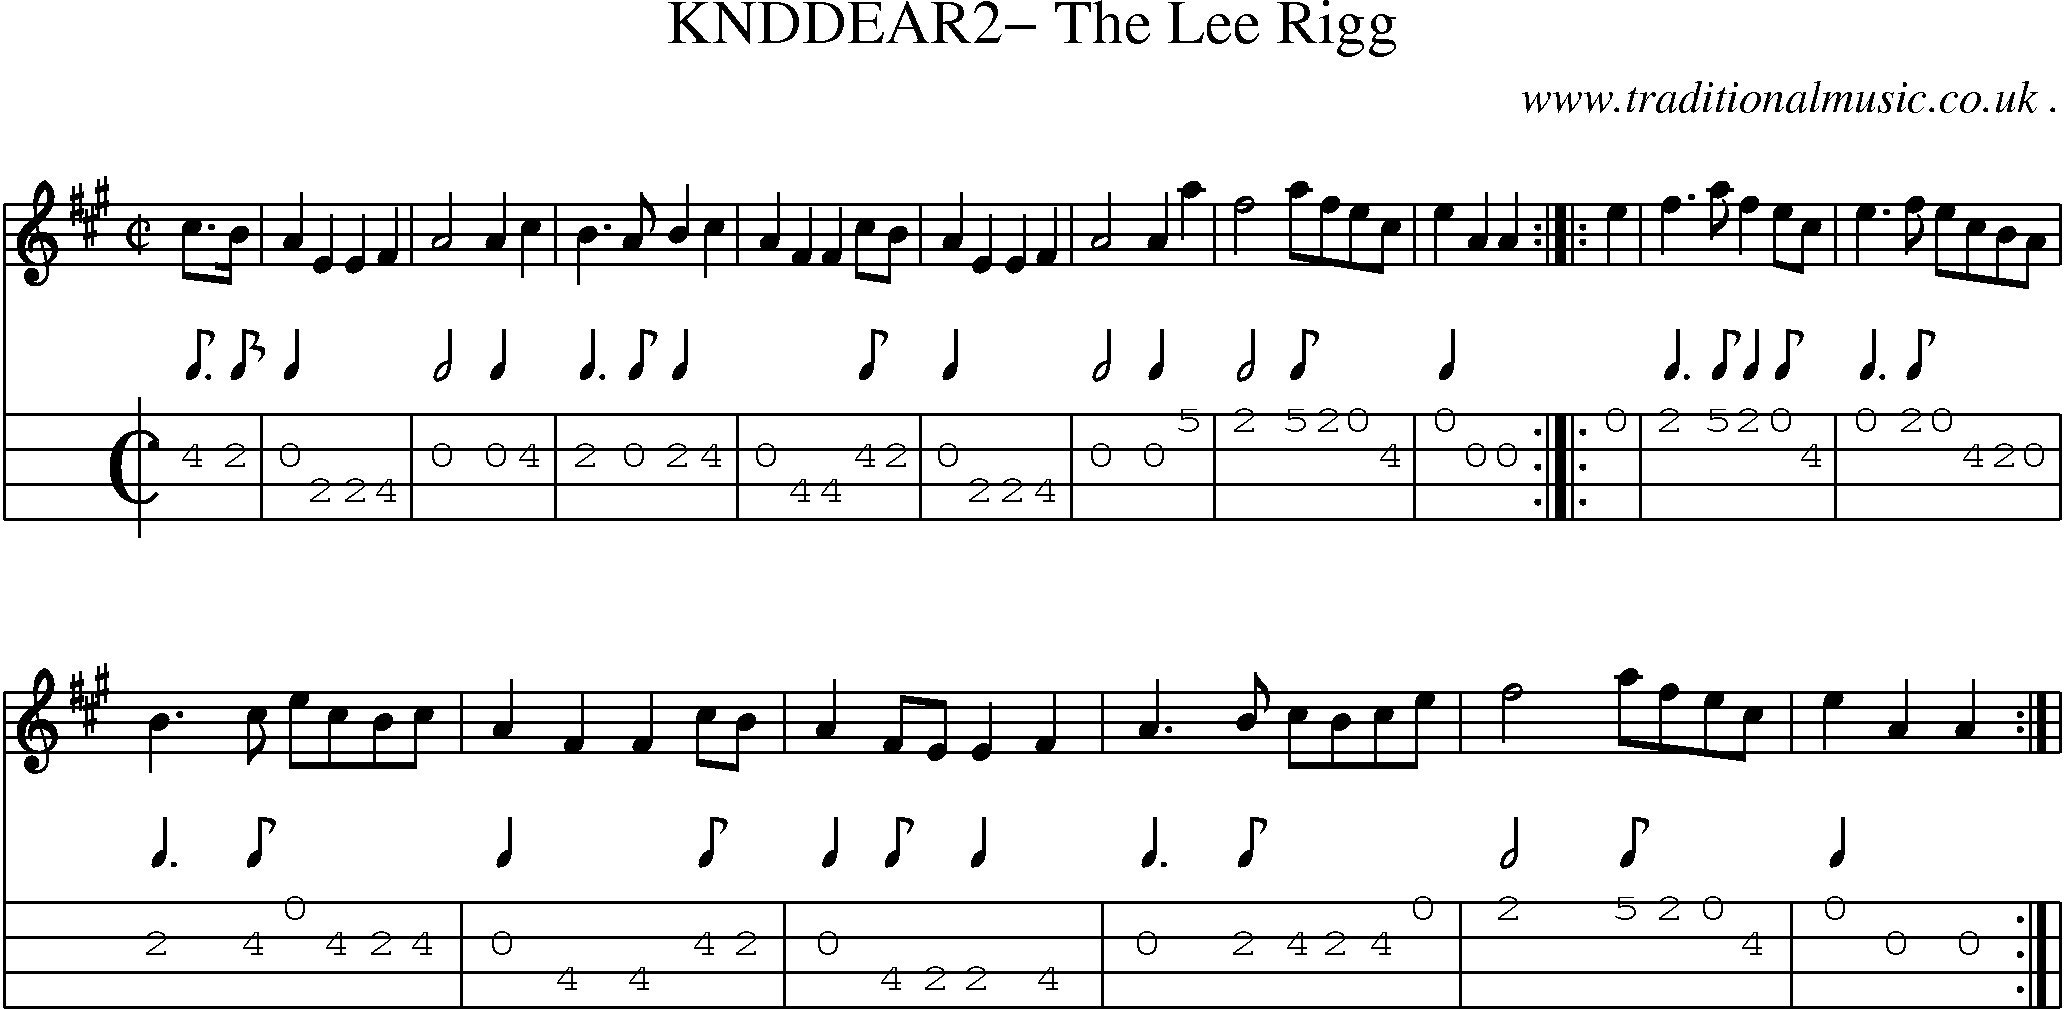 Sheet-Music and Mandolin Tabs for Knddear2 The Lee Rigg